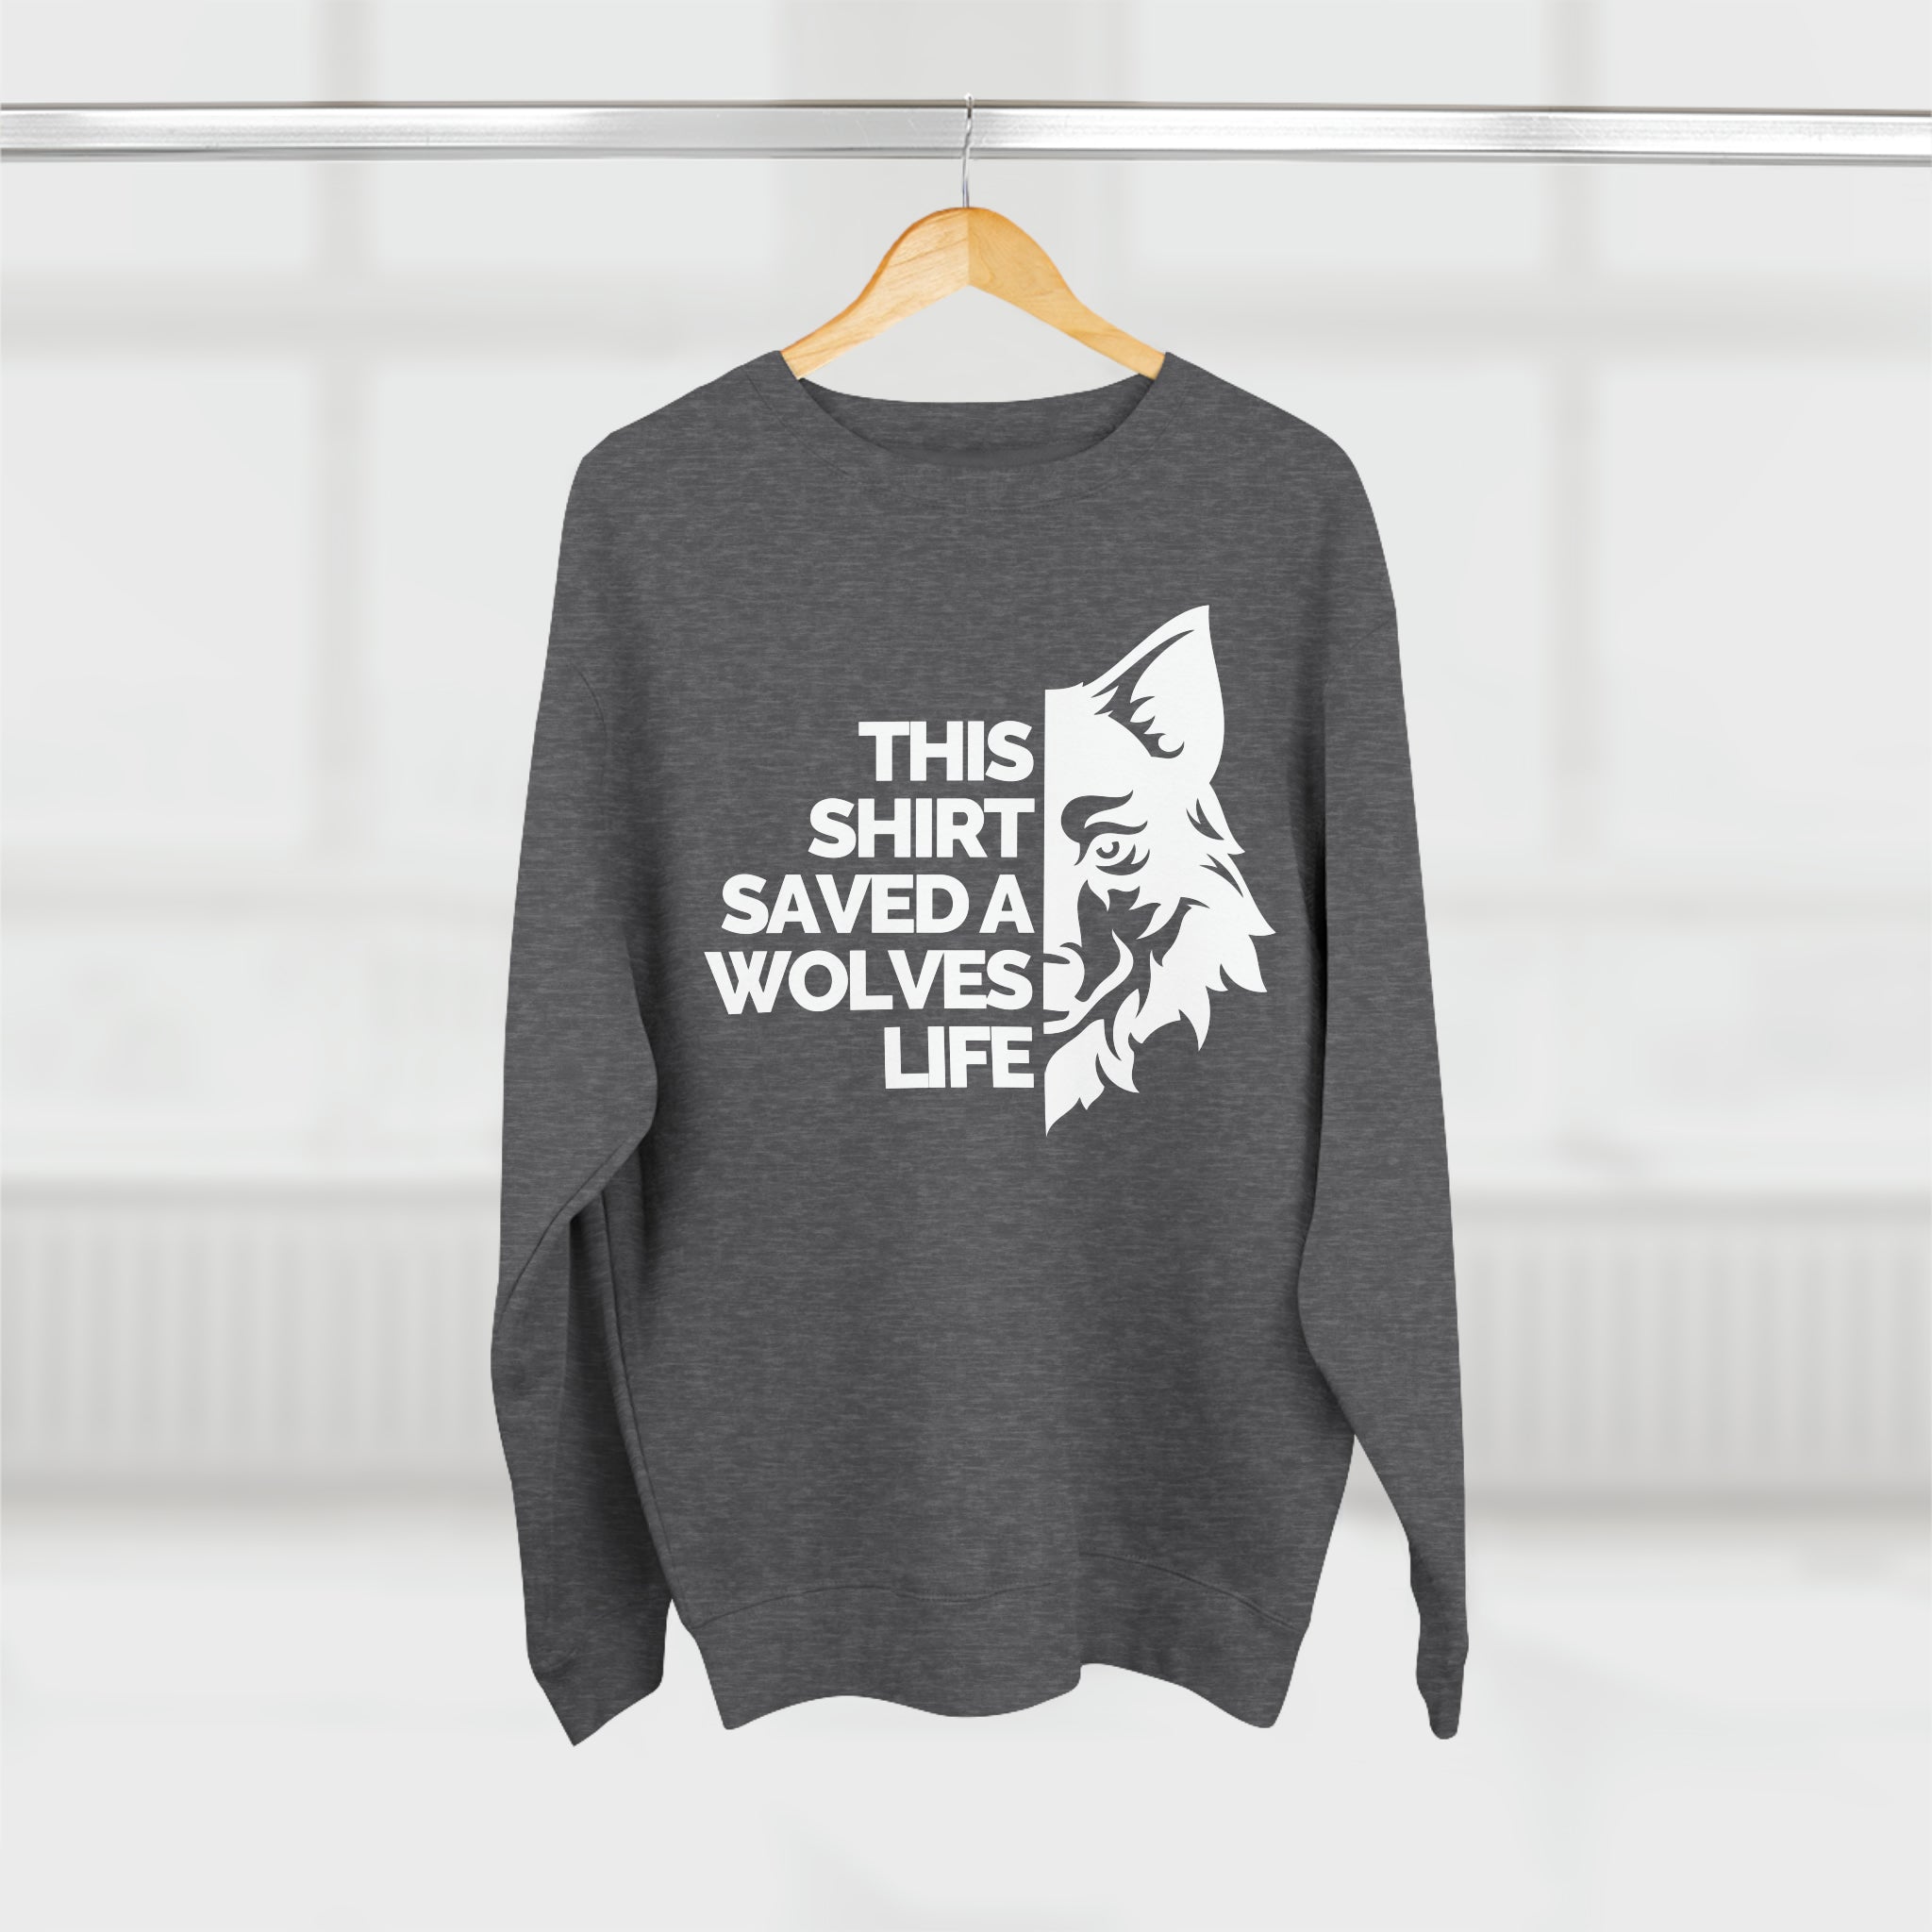 This Sweatshirt Saved a Wolves Life